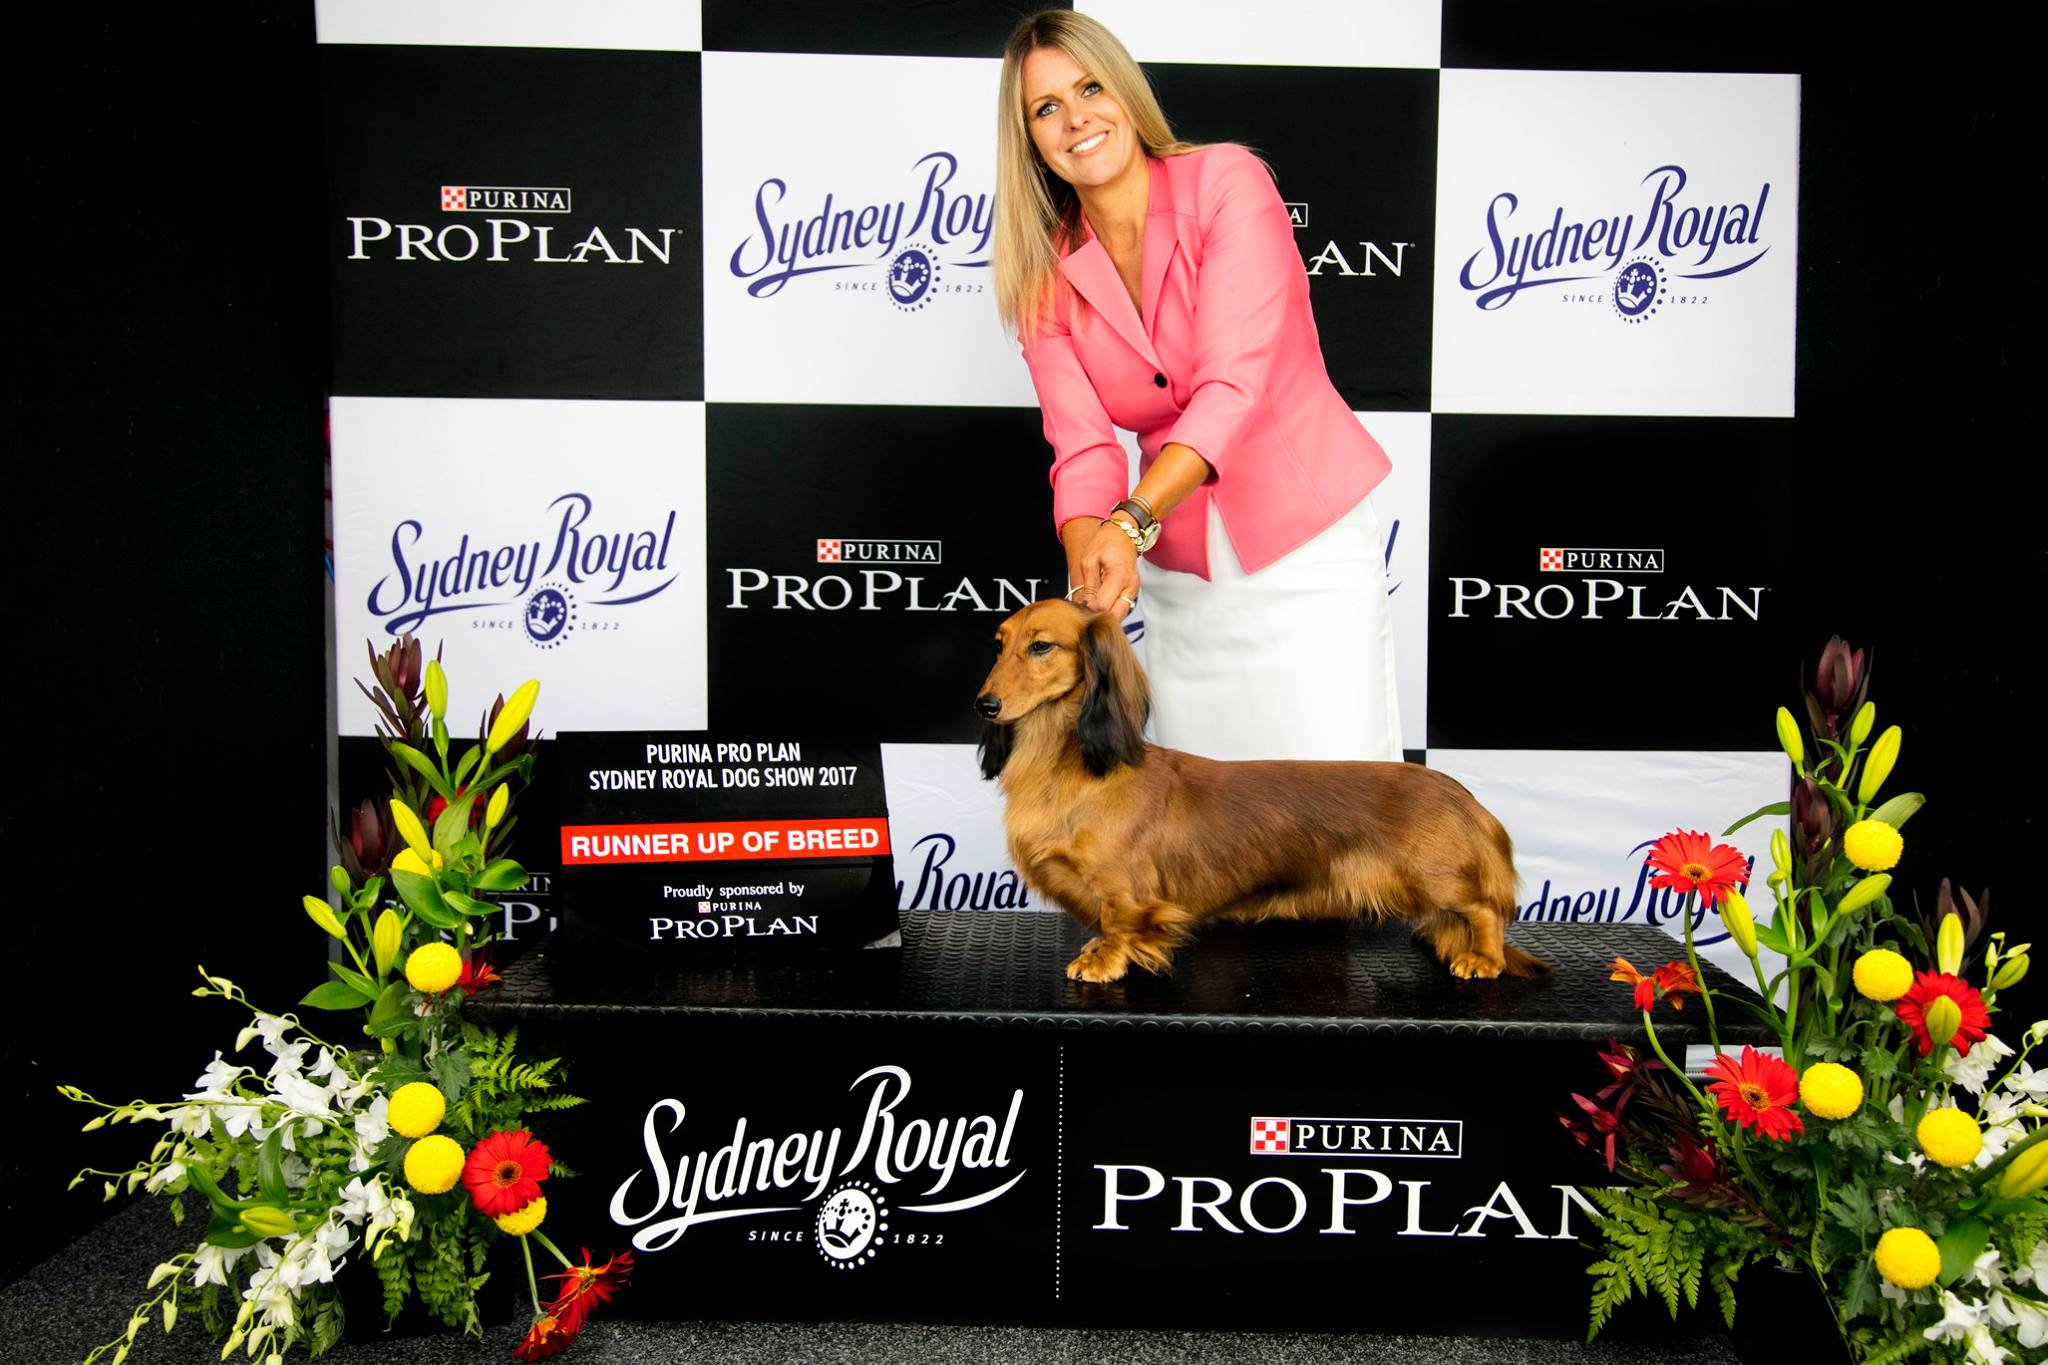 Angie Wins Bitch Challenge & Runner-Up Best of Breed at Sydney Royal Show.